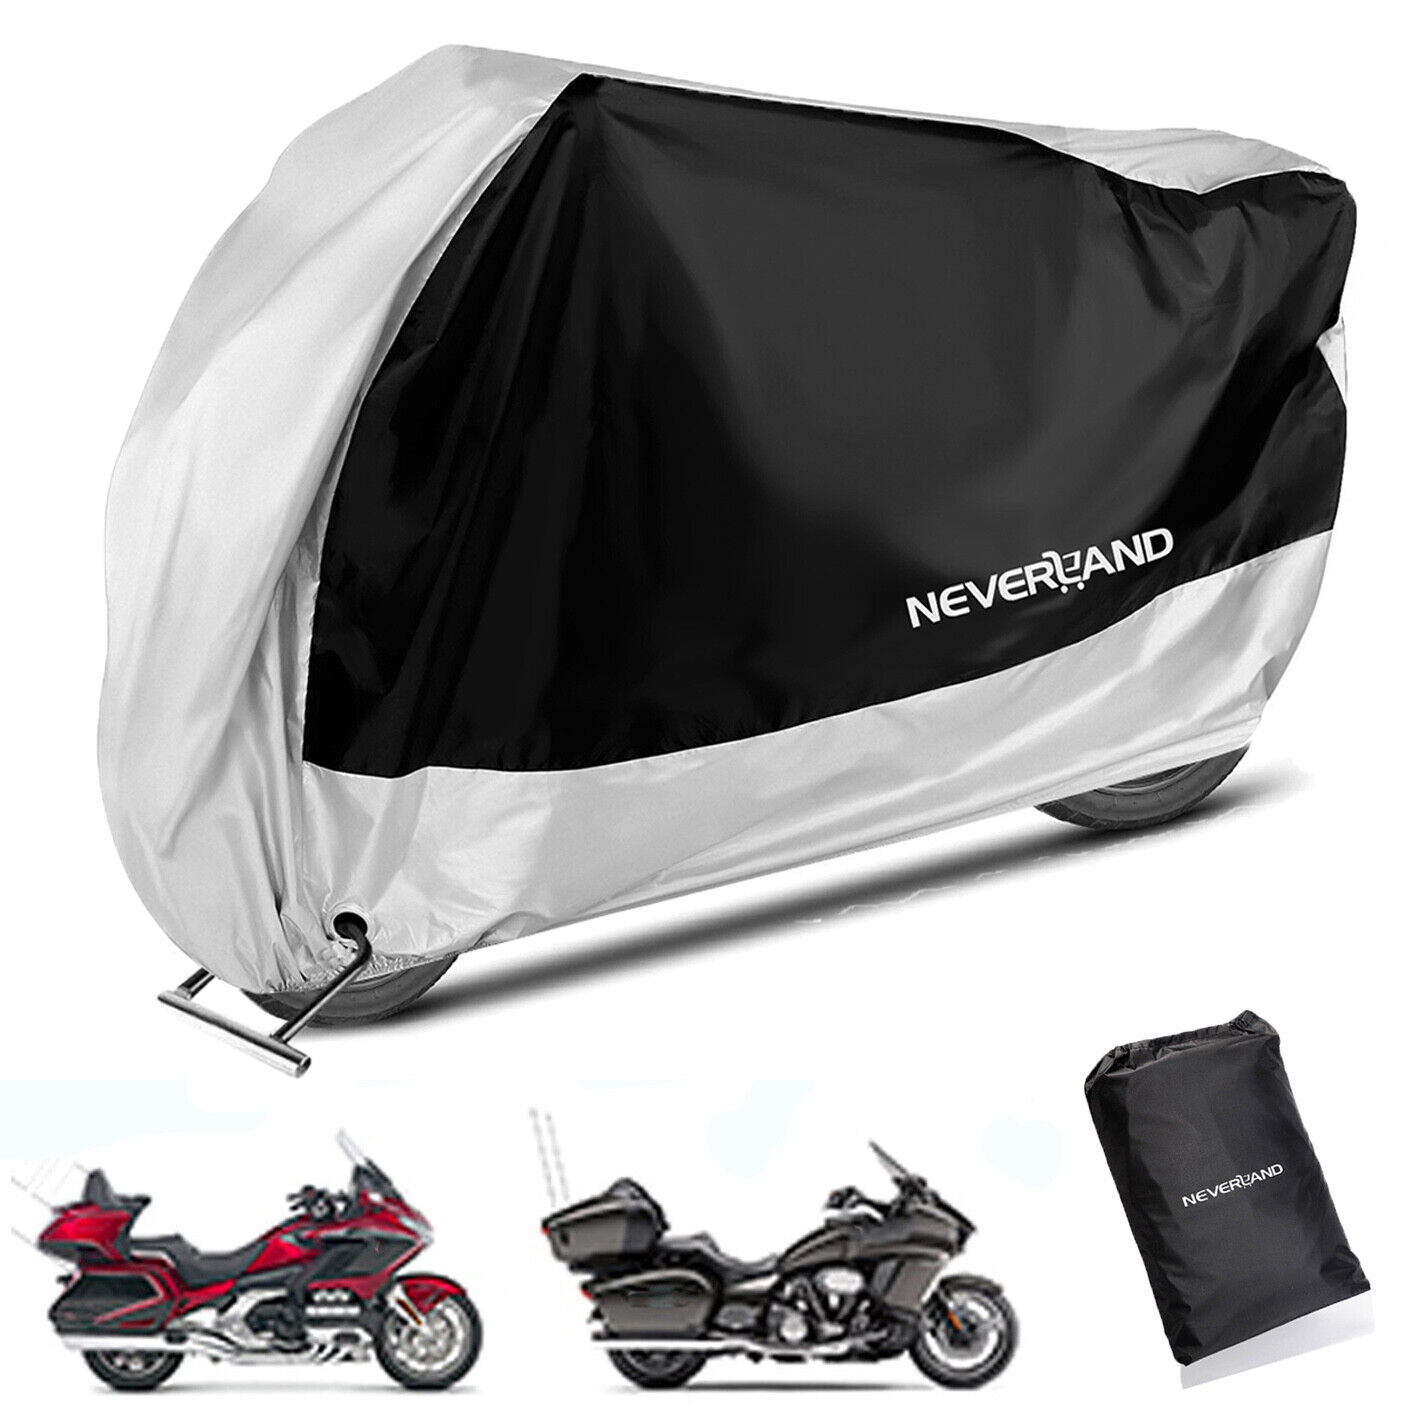 XXXL Black&Silver Motorcycle Cover For Honda Goldwing GL1800 1500 1200 1000 1100